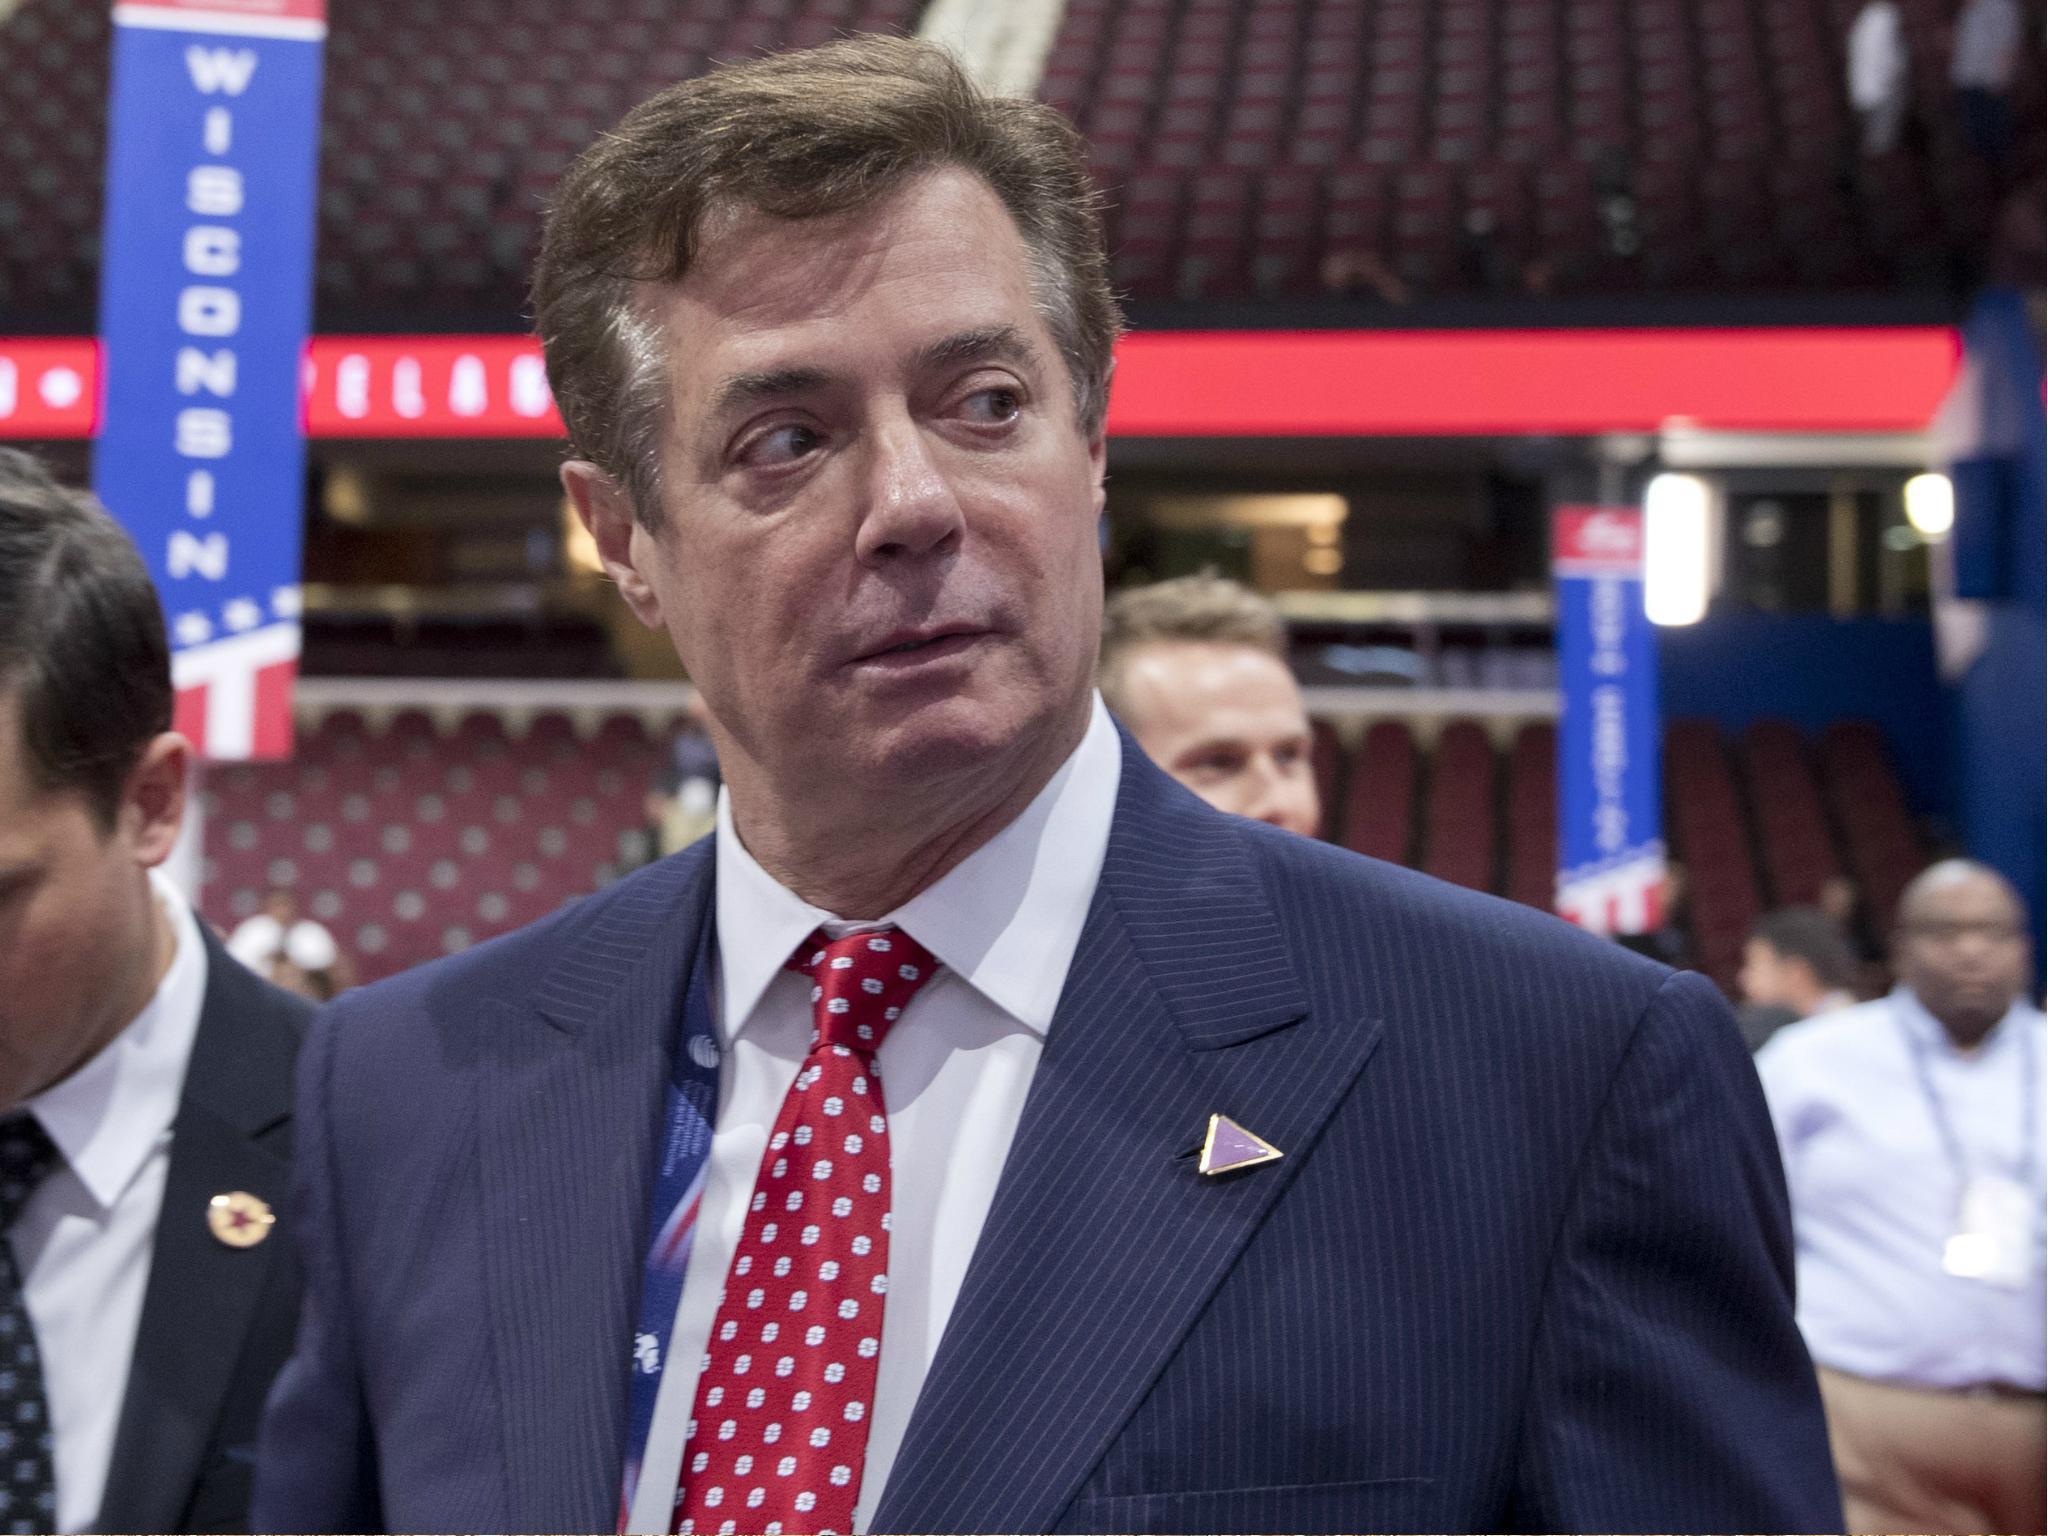 Paul Manafort is under investigation by a number of law enforcement offices